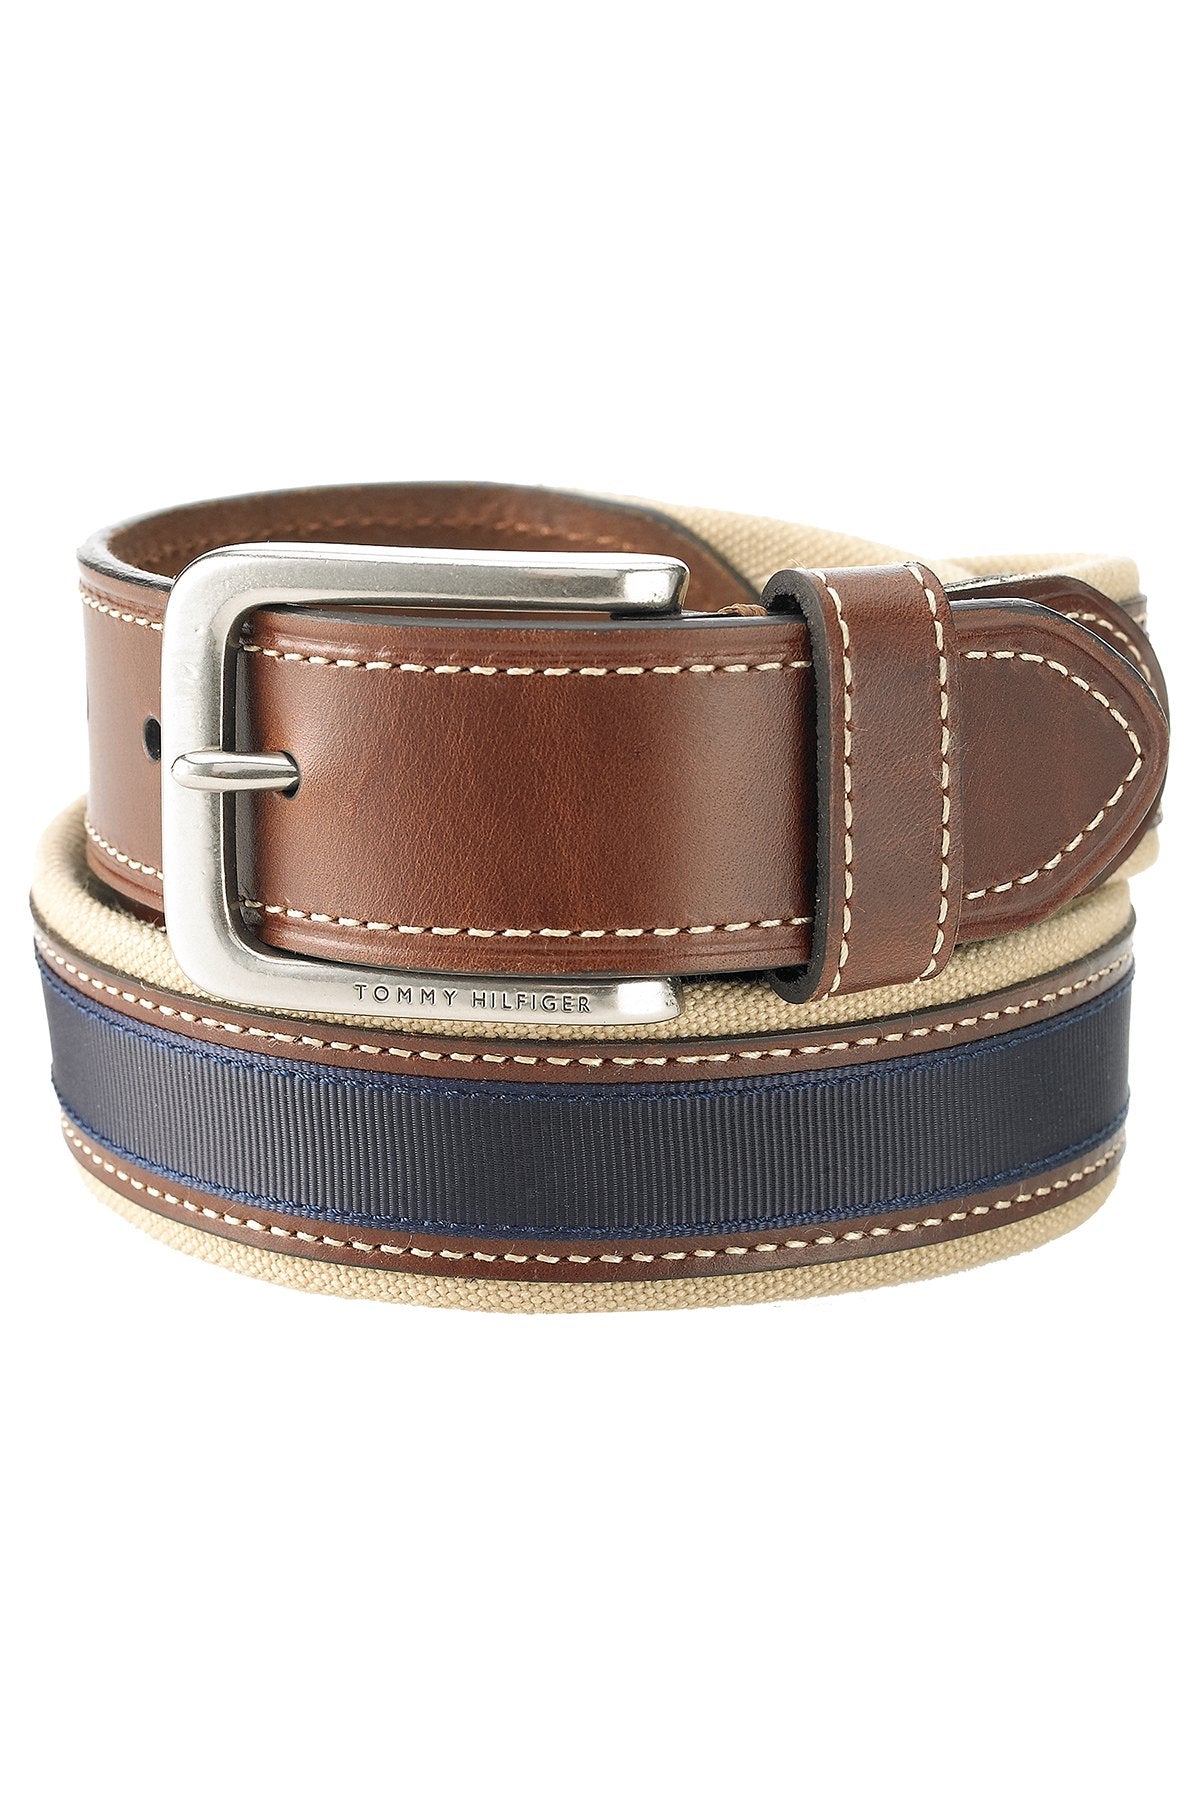 Tommy Hilfiger Khaki/Brown/Navy Canvas/Leather Casual Belt